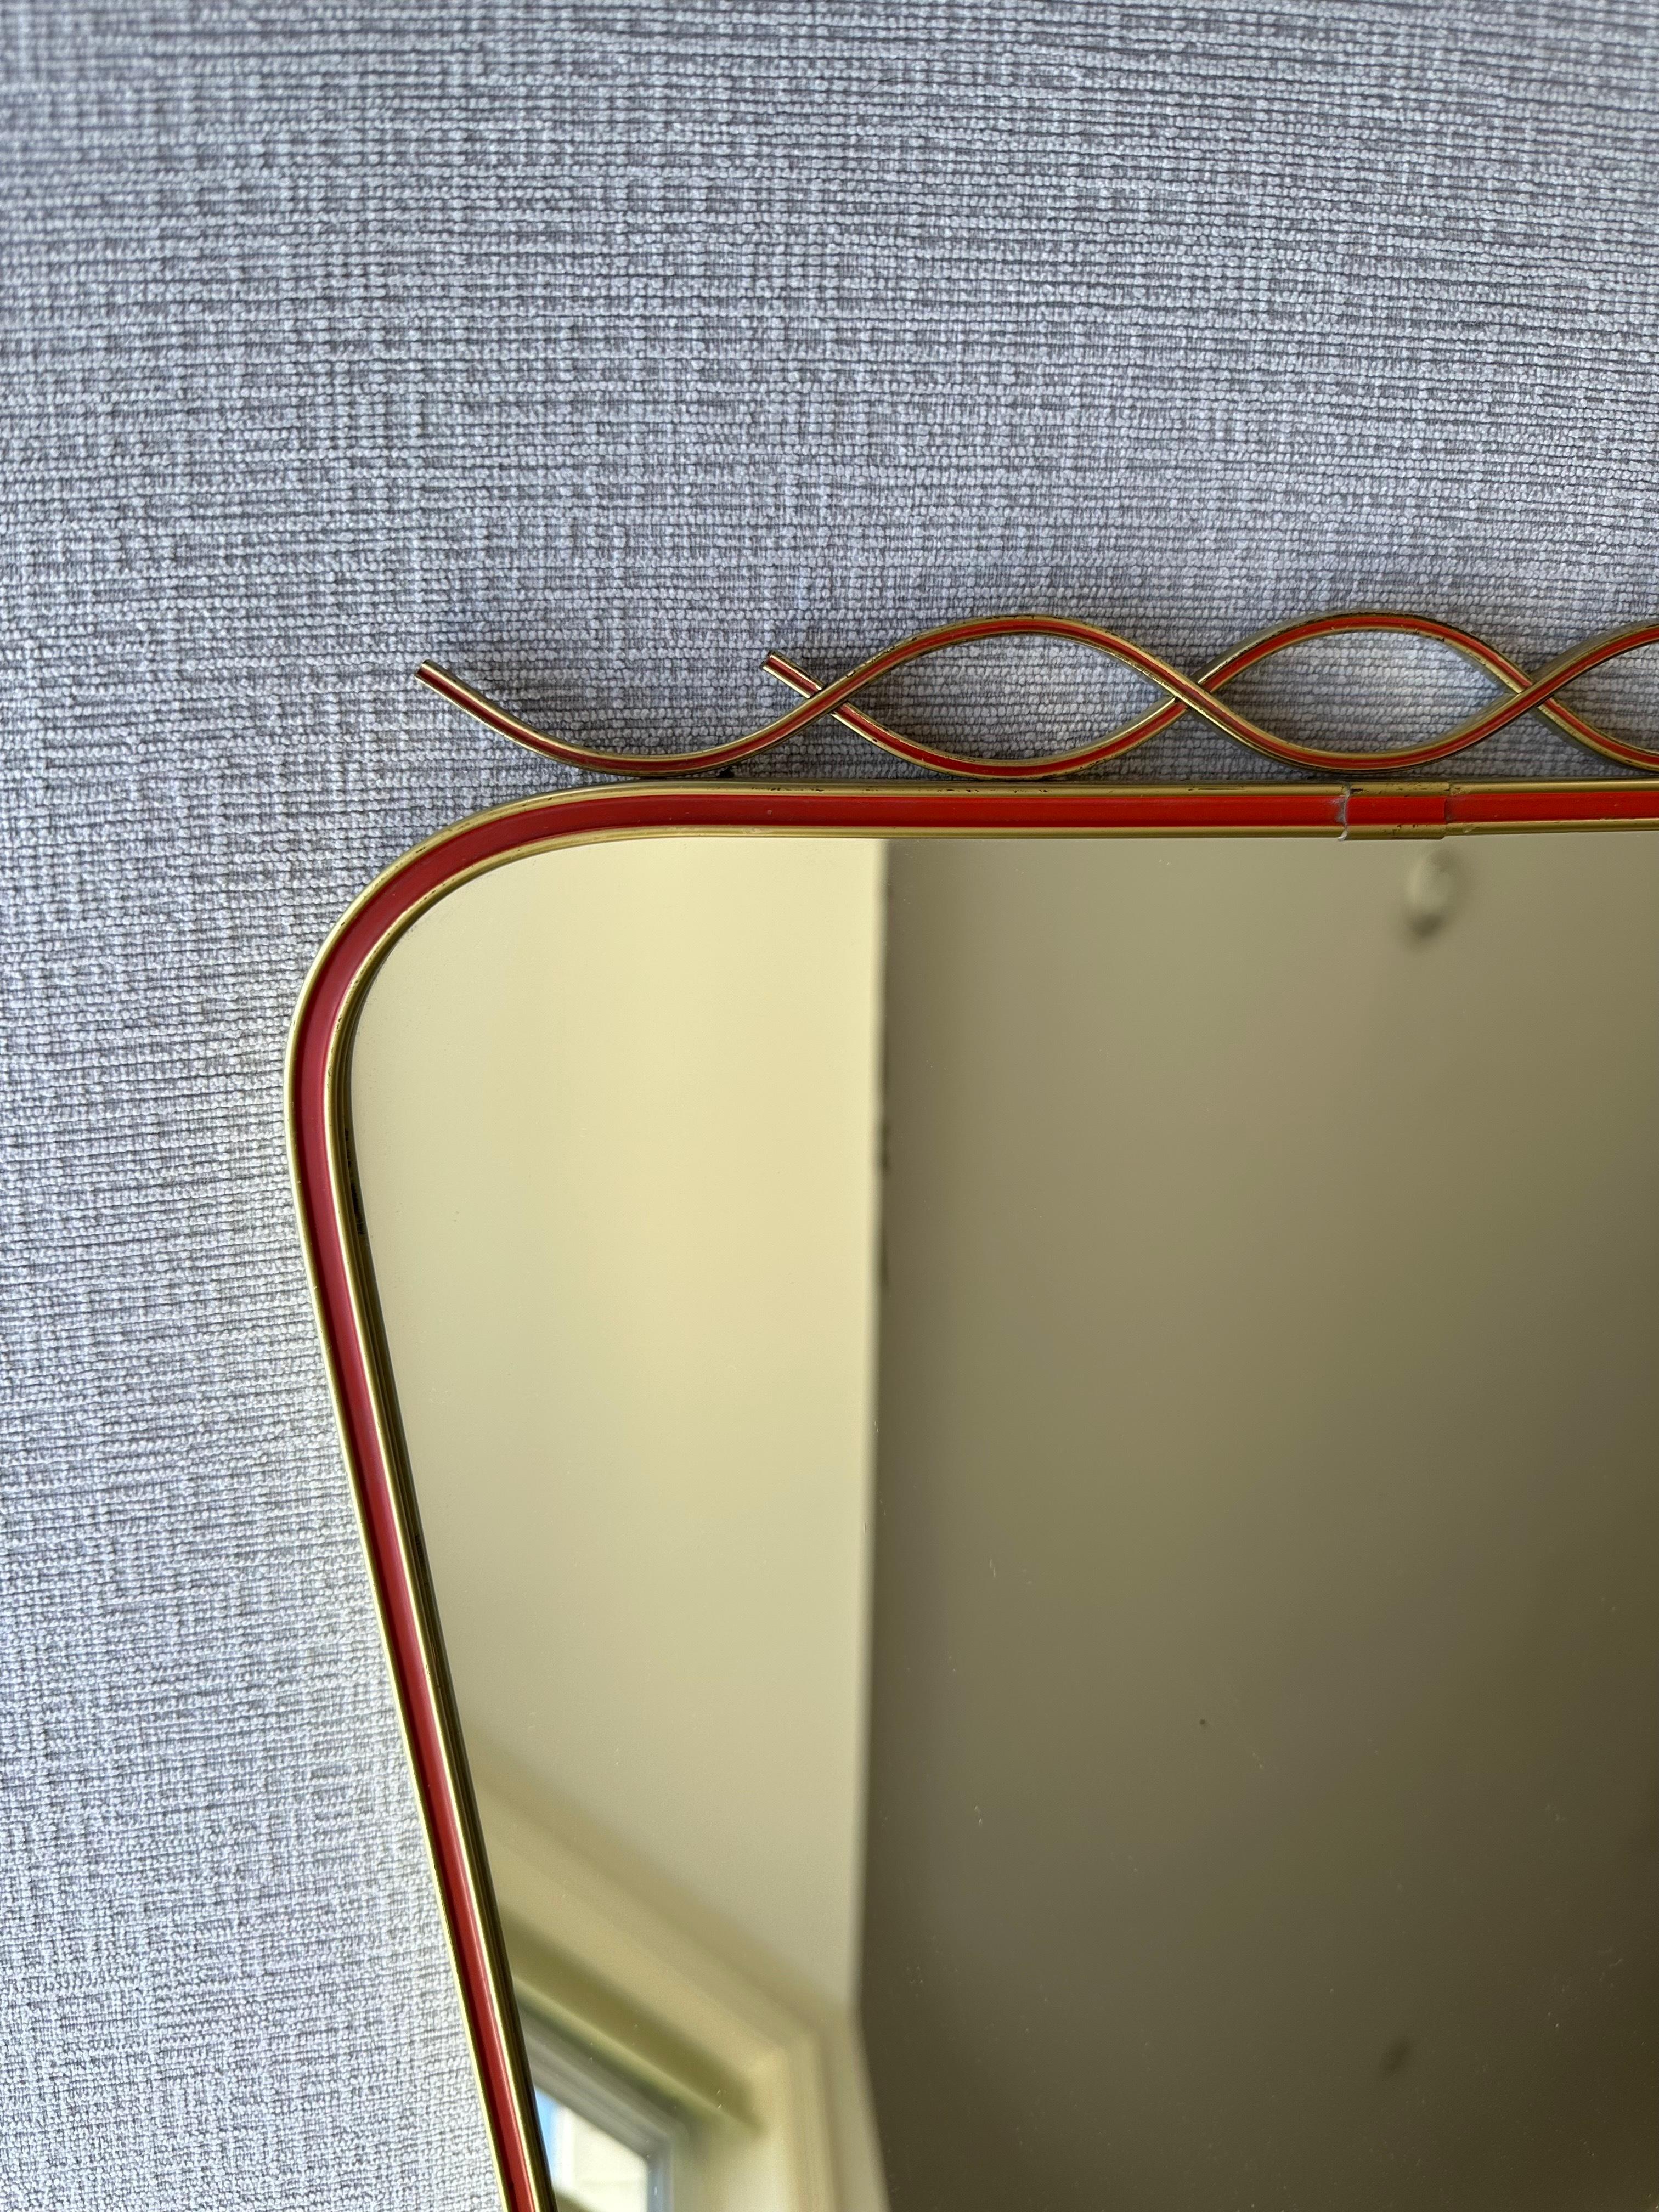 Vintage Italian Mid-Century Modern brass wall mirror. Featuring an asymmetrical shield shape that is widest at the top. This hanging mirror is crafted in a brass frame with a red lacquer detail surround. At the top, an intersecting wave pattern